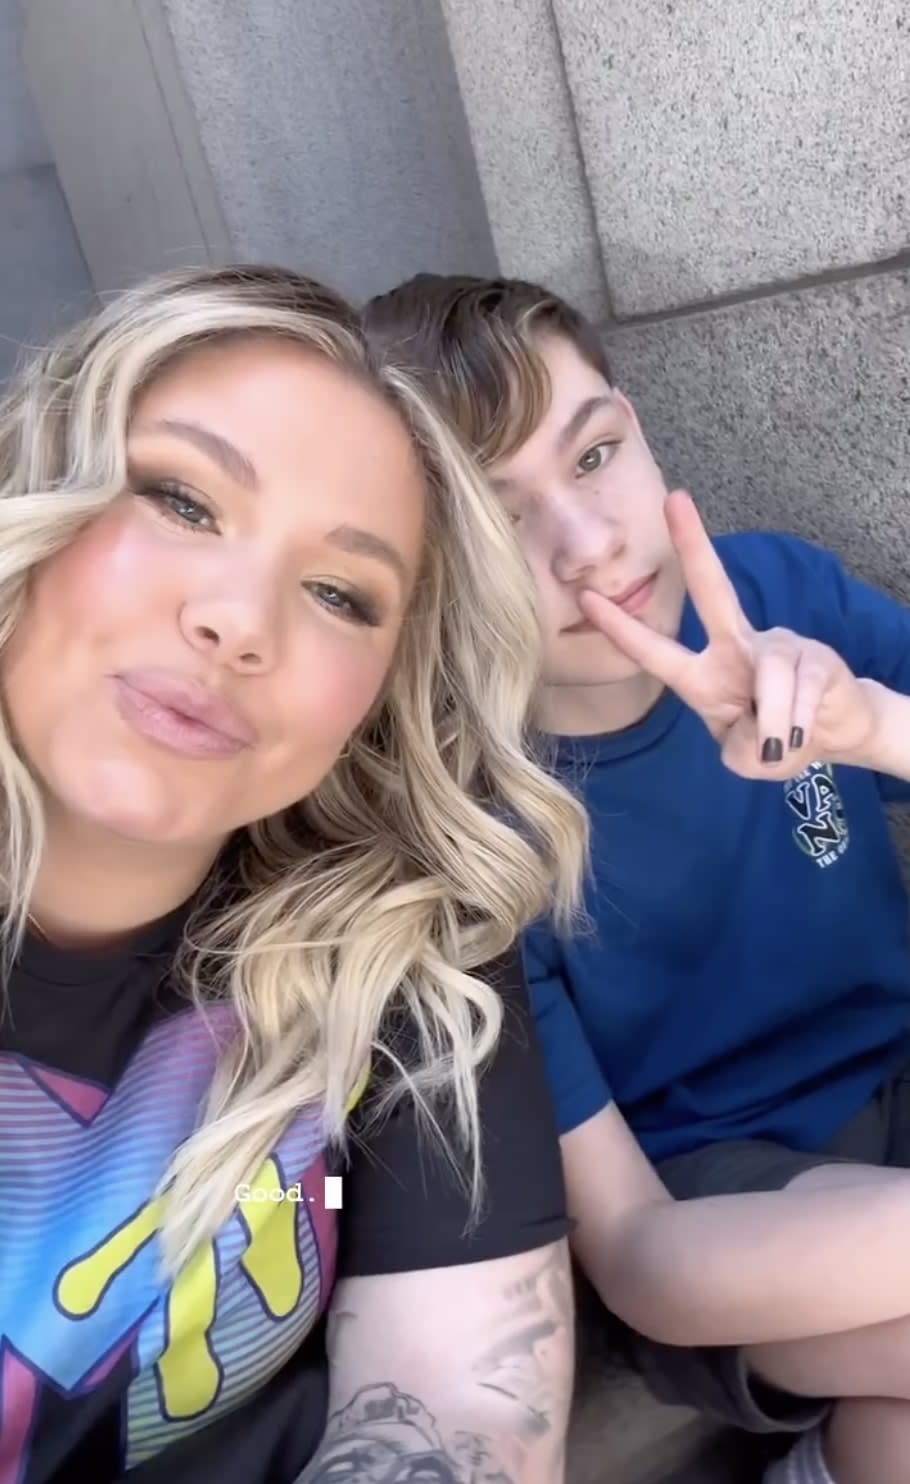 Teen Mom’s Kailyn Lowry’s Son Isaac Urges Her to ‘Stop Having Kids’ After Twins’ Sex Reveal